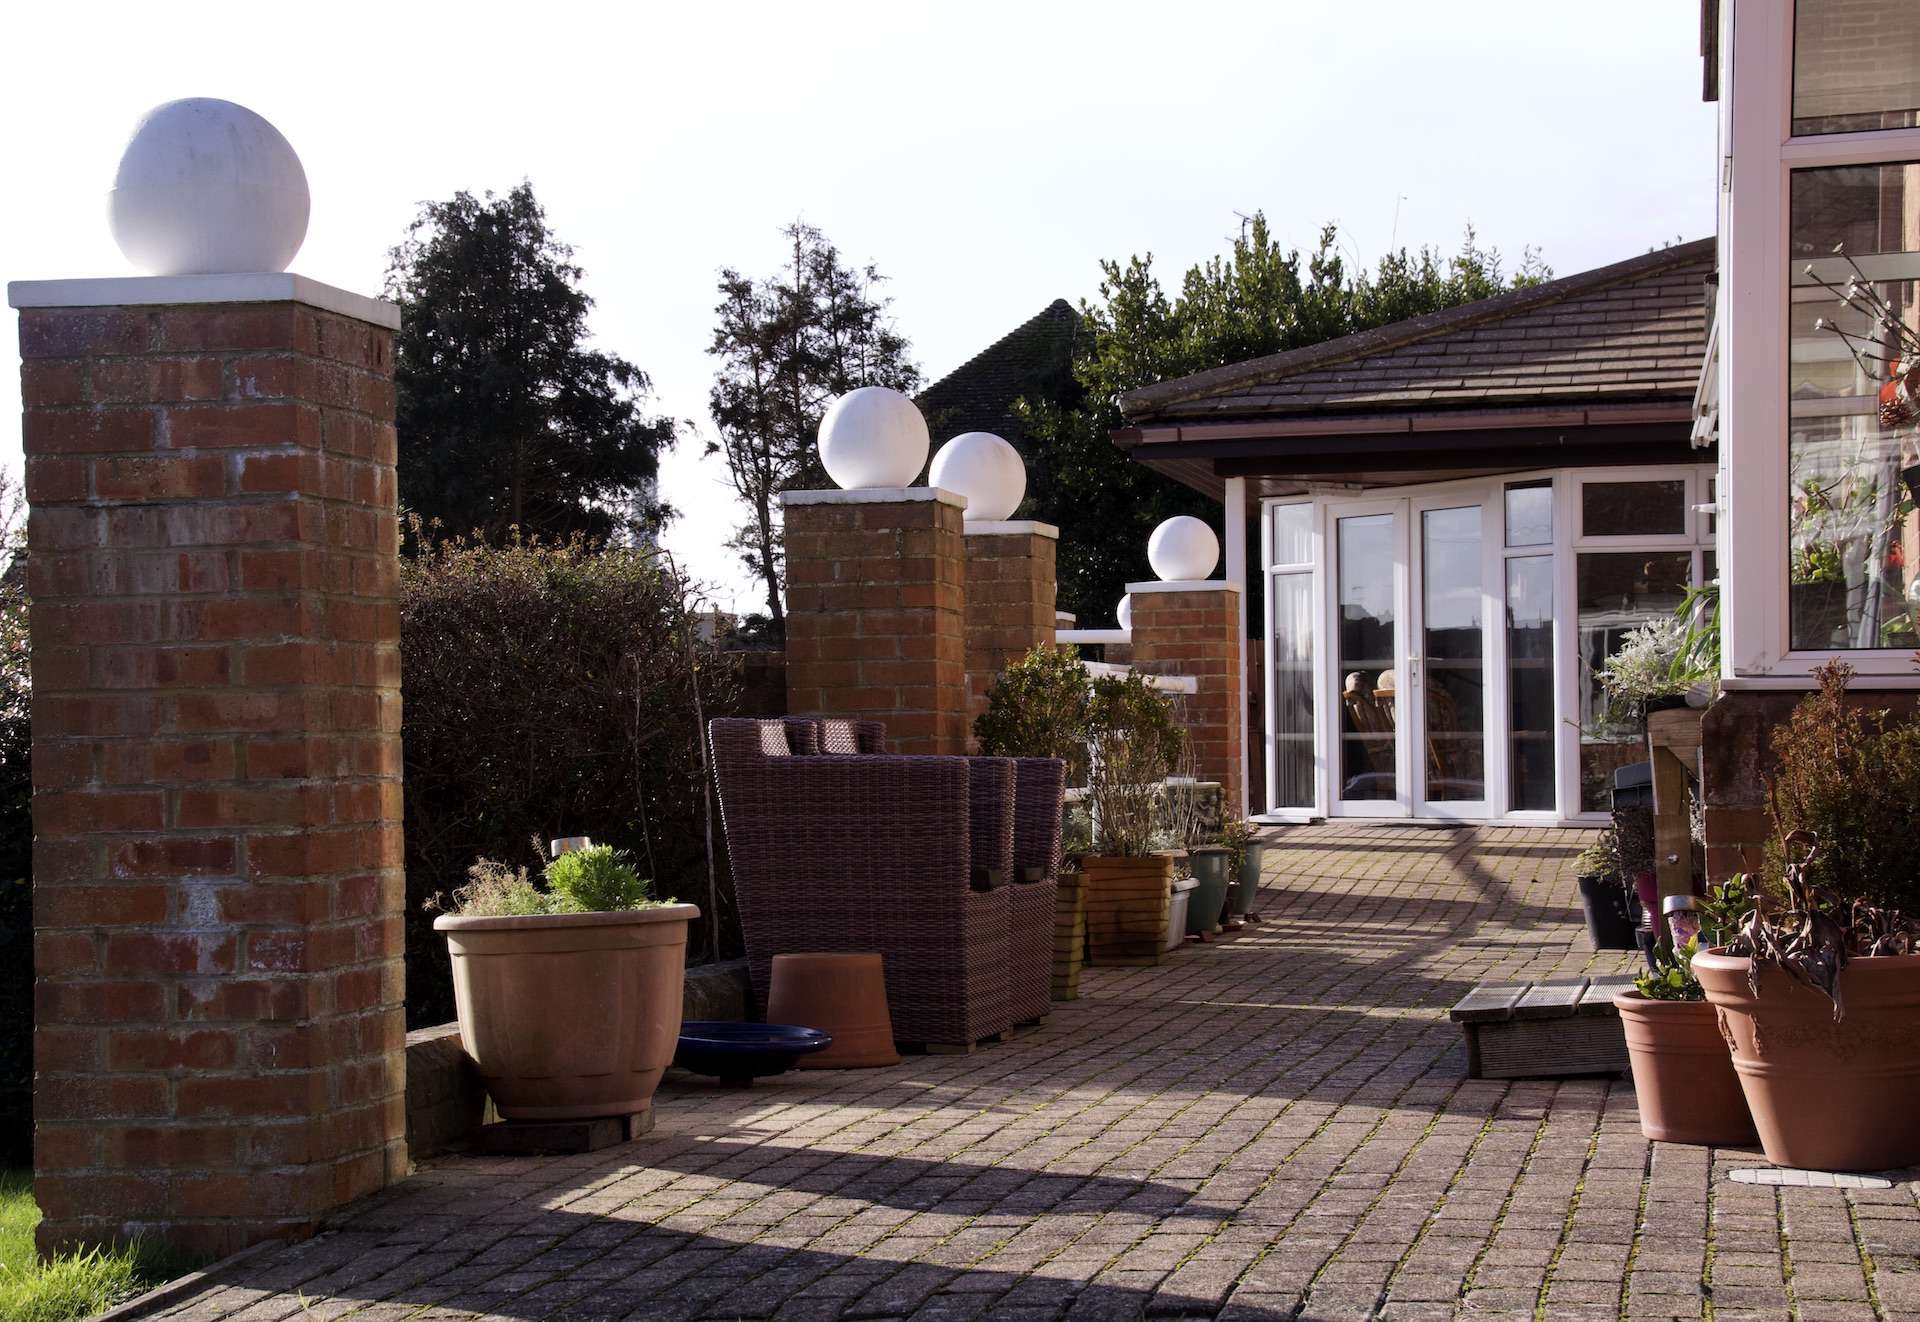 CCH image showing the outside area at Chesswood Lea